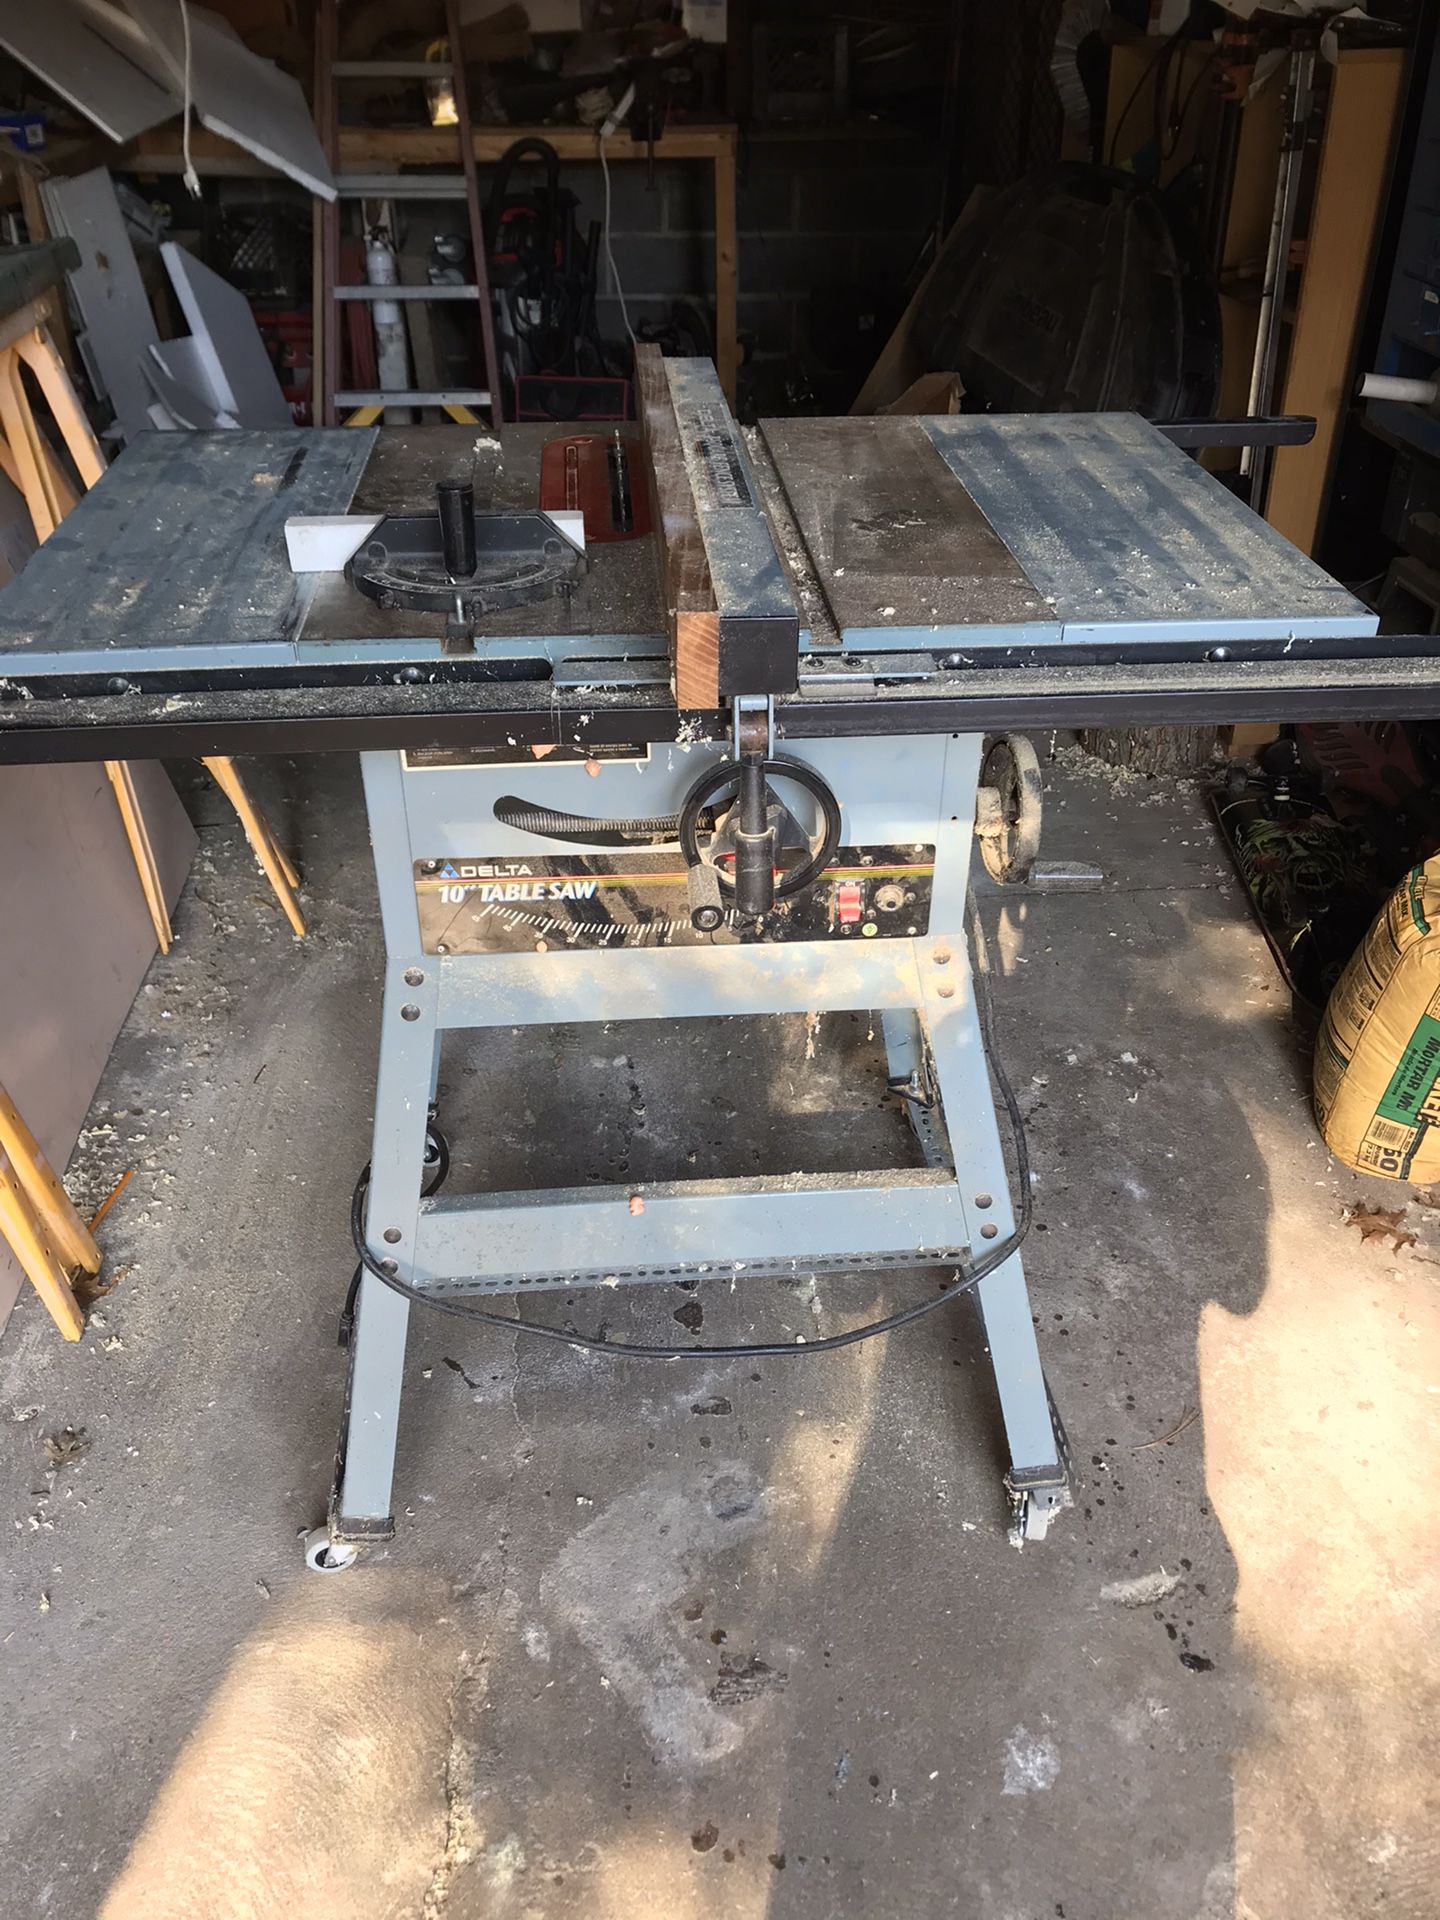 Delta table saw $250 obo-will consider trade for planer